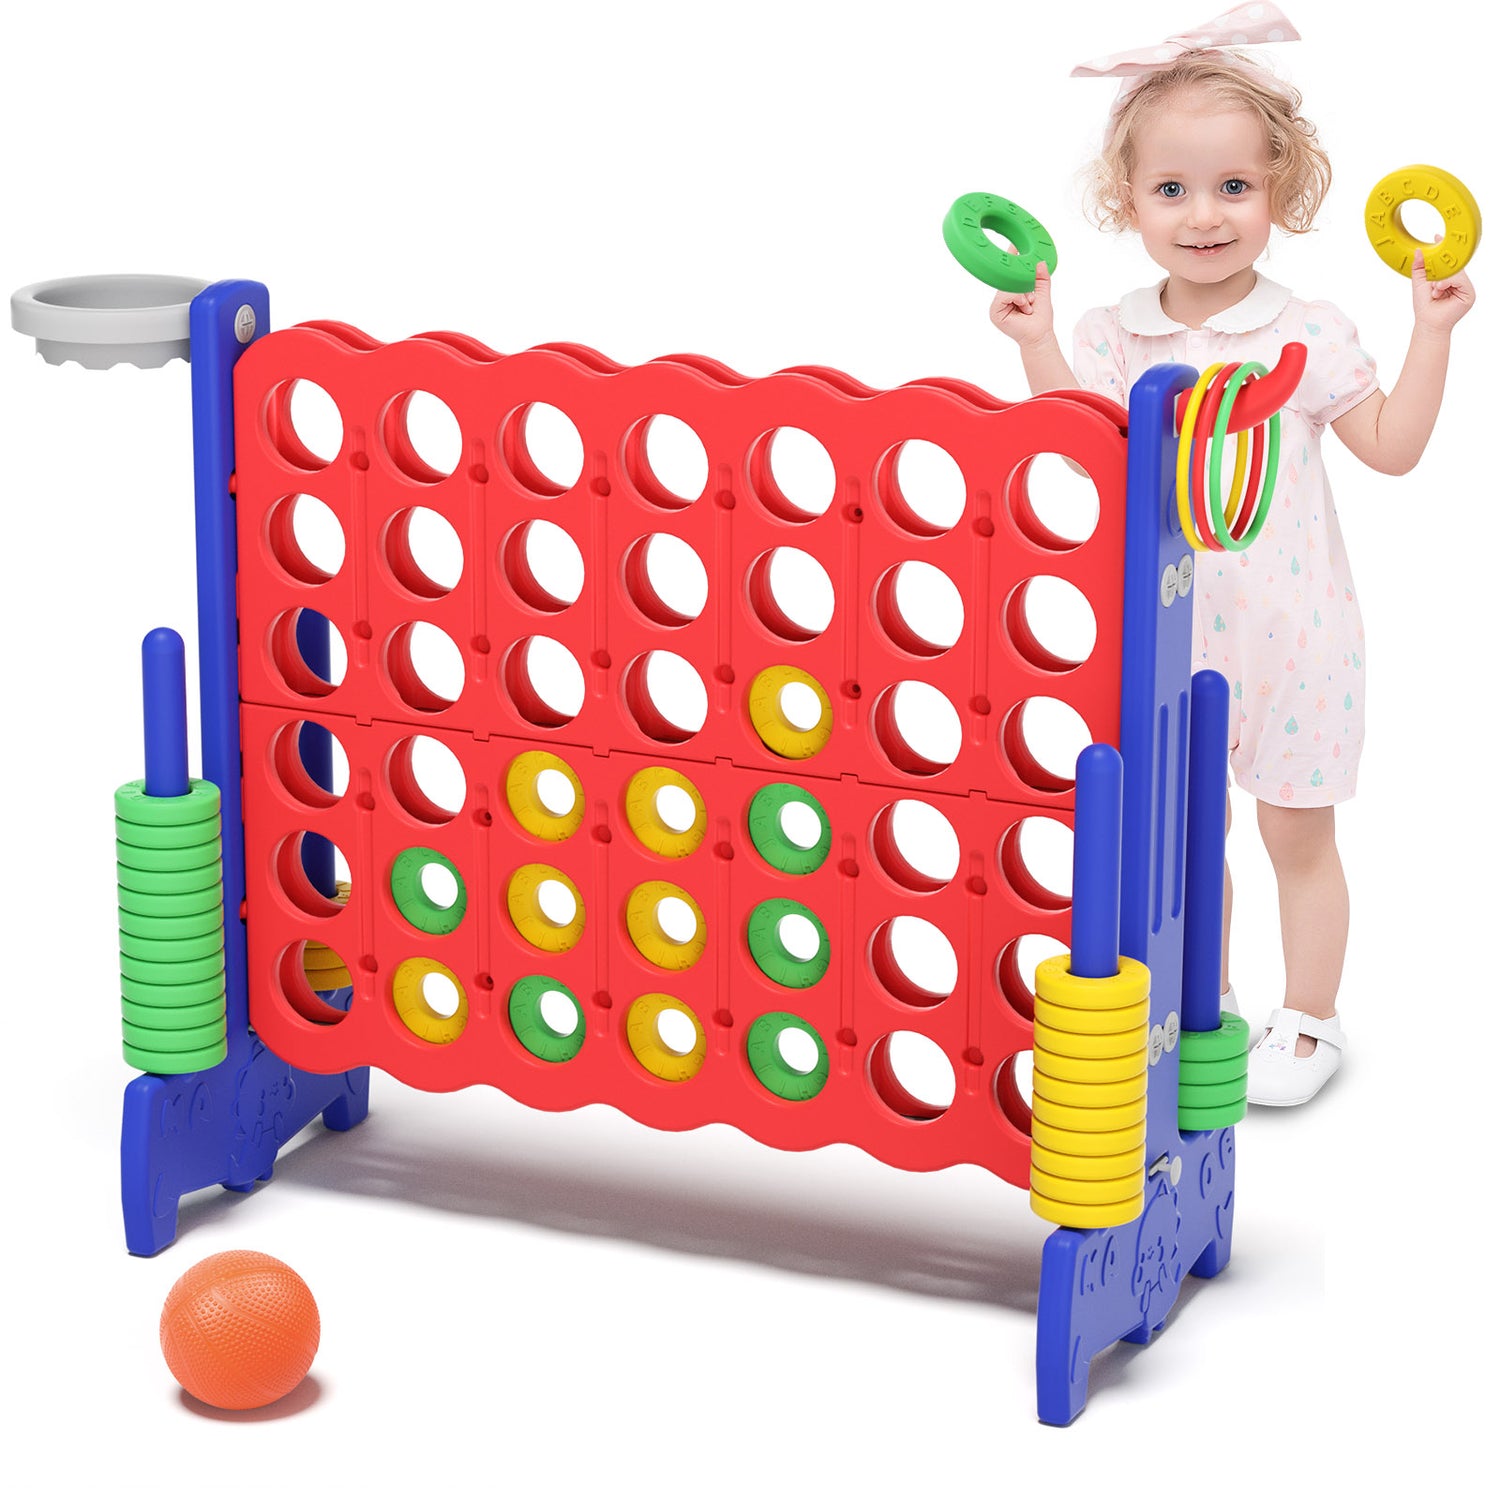 Elevate Fun and Learning: The Benefits of KidsBuy's Giant 4-in-A-Row Jumbo Game Set